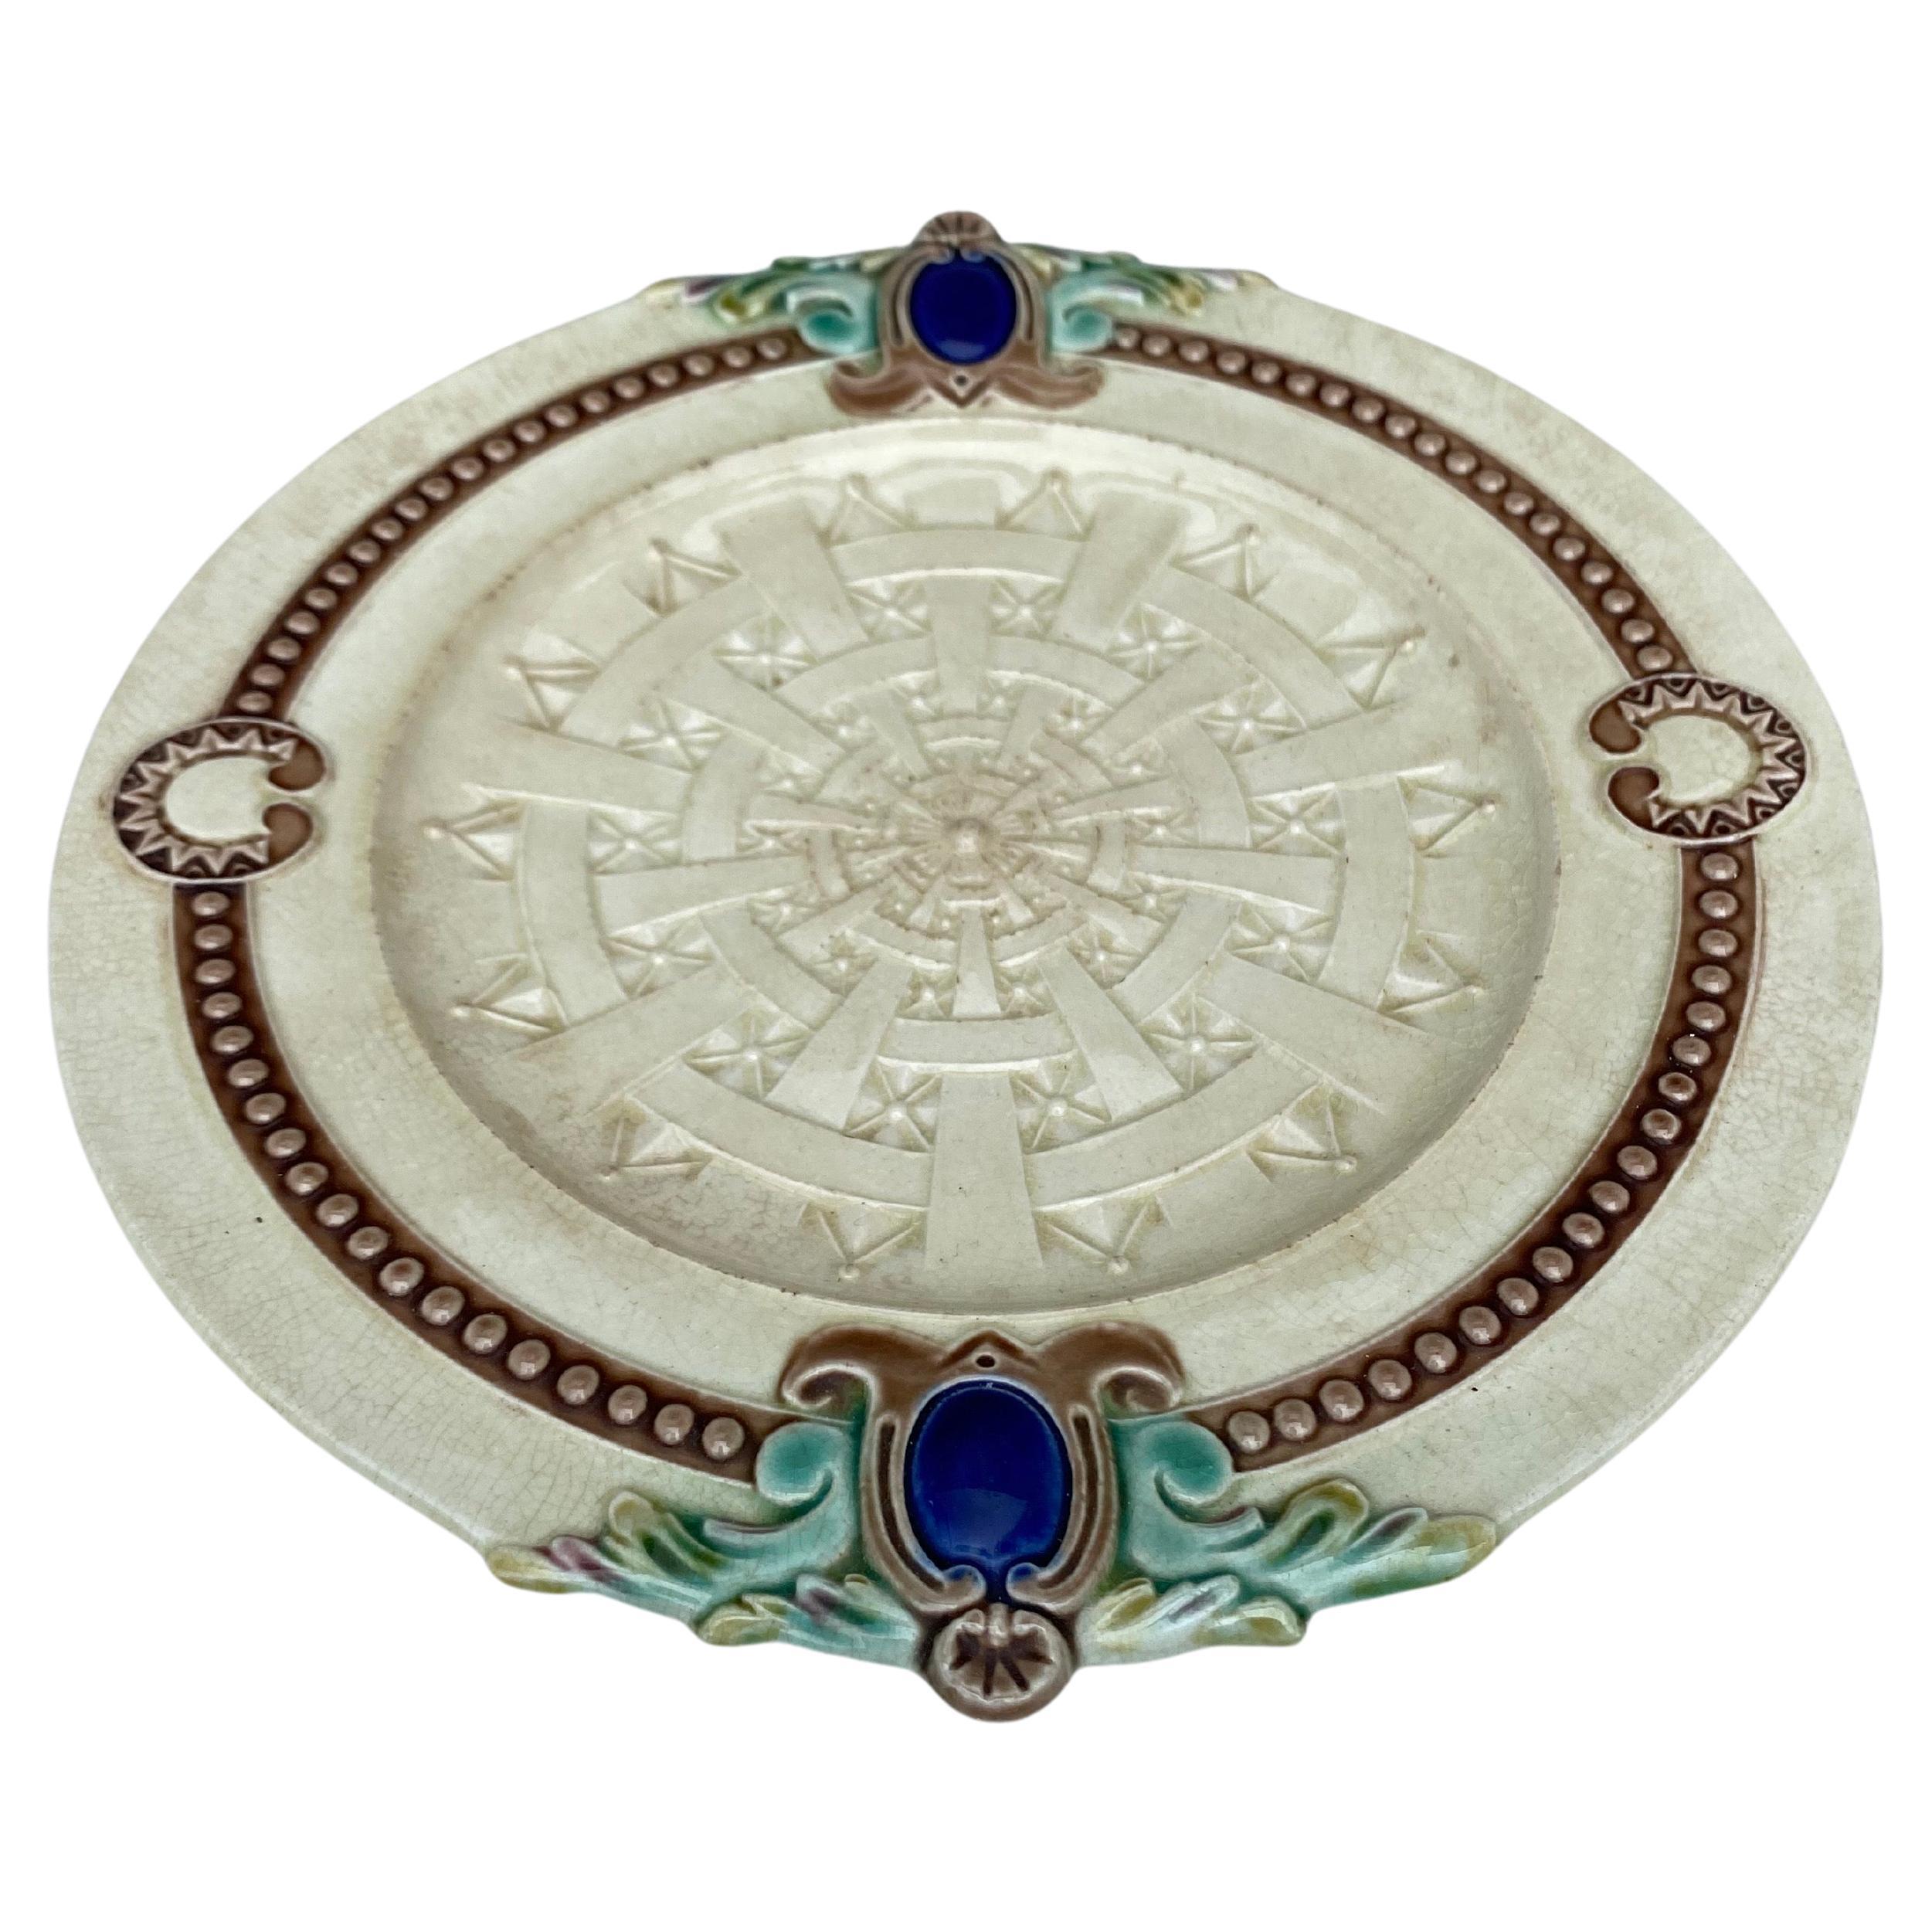 French Majolica plate with a geometrical pattern circa 1890.